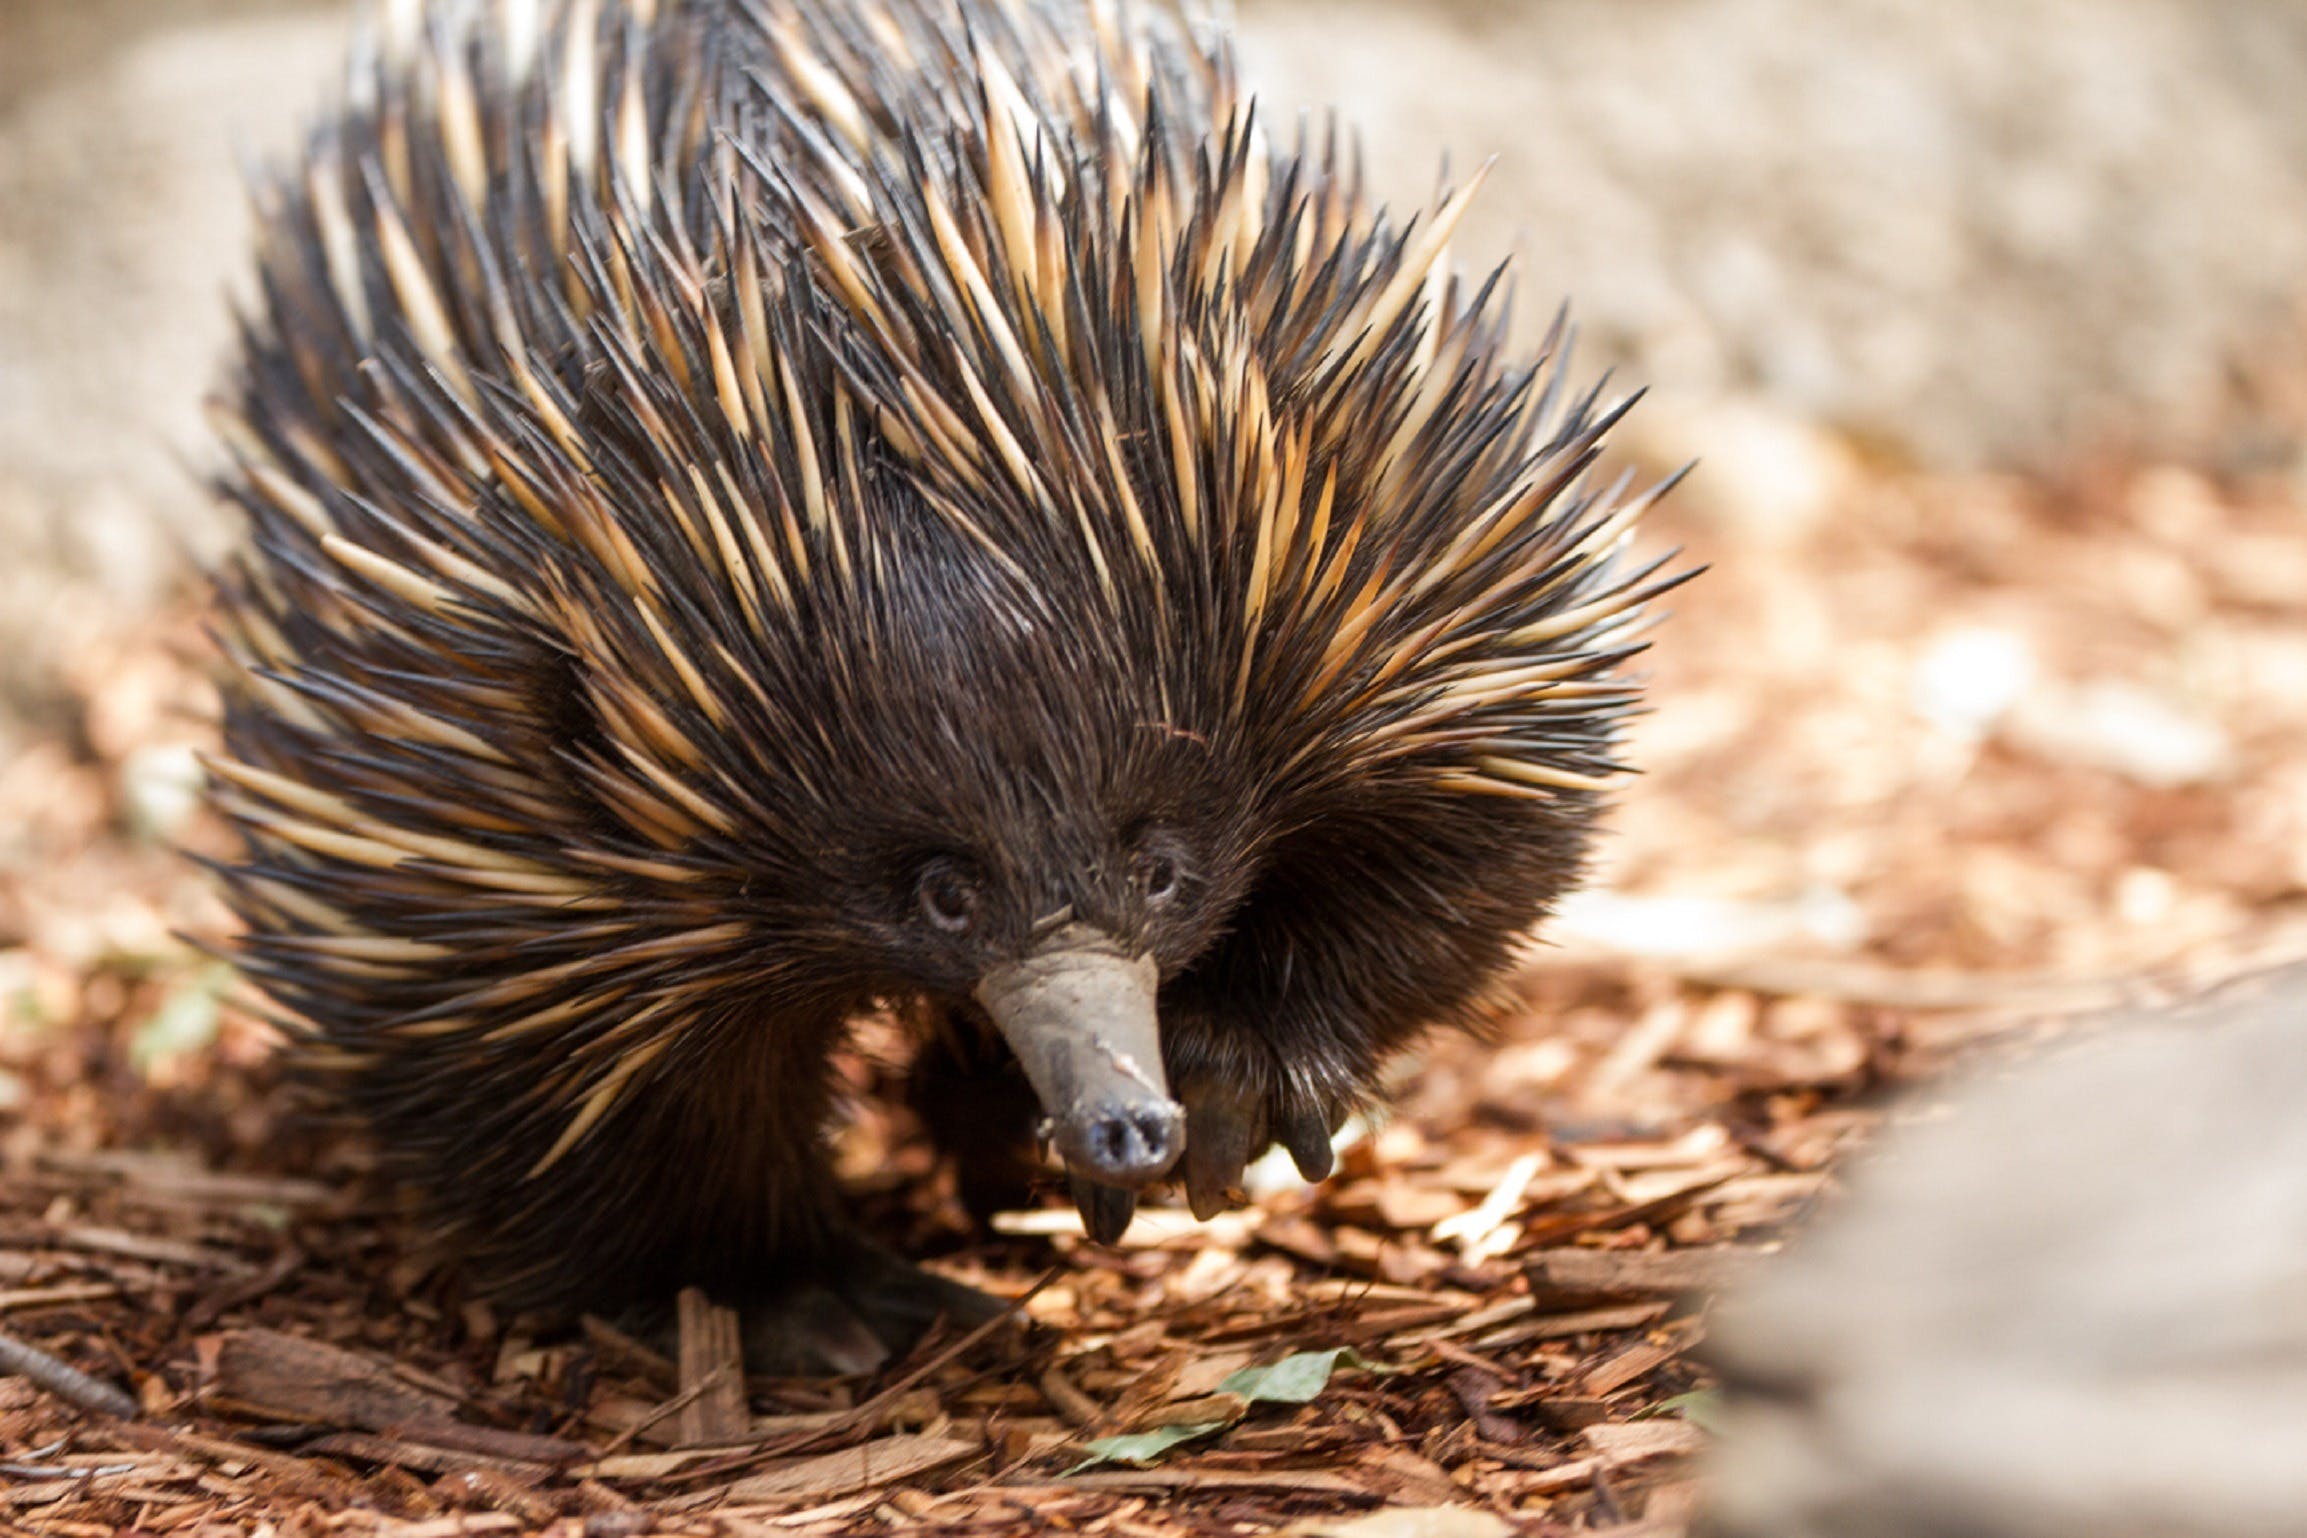 Aussie Wildlife Course - July/August/September - Accommodation Airlie Beach